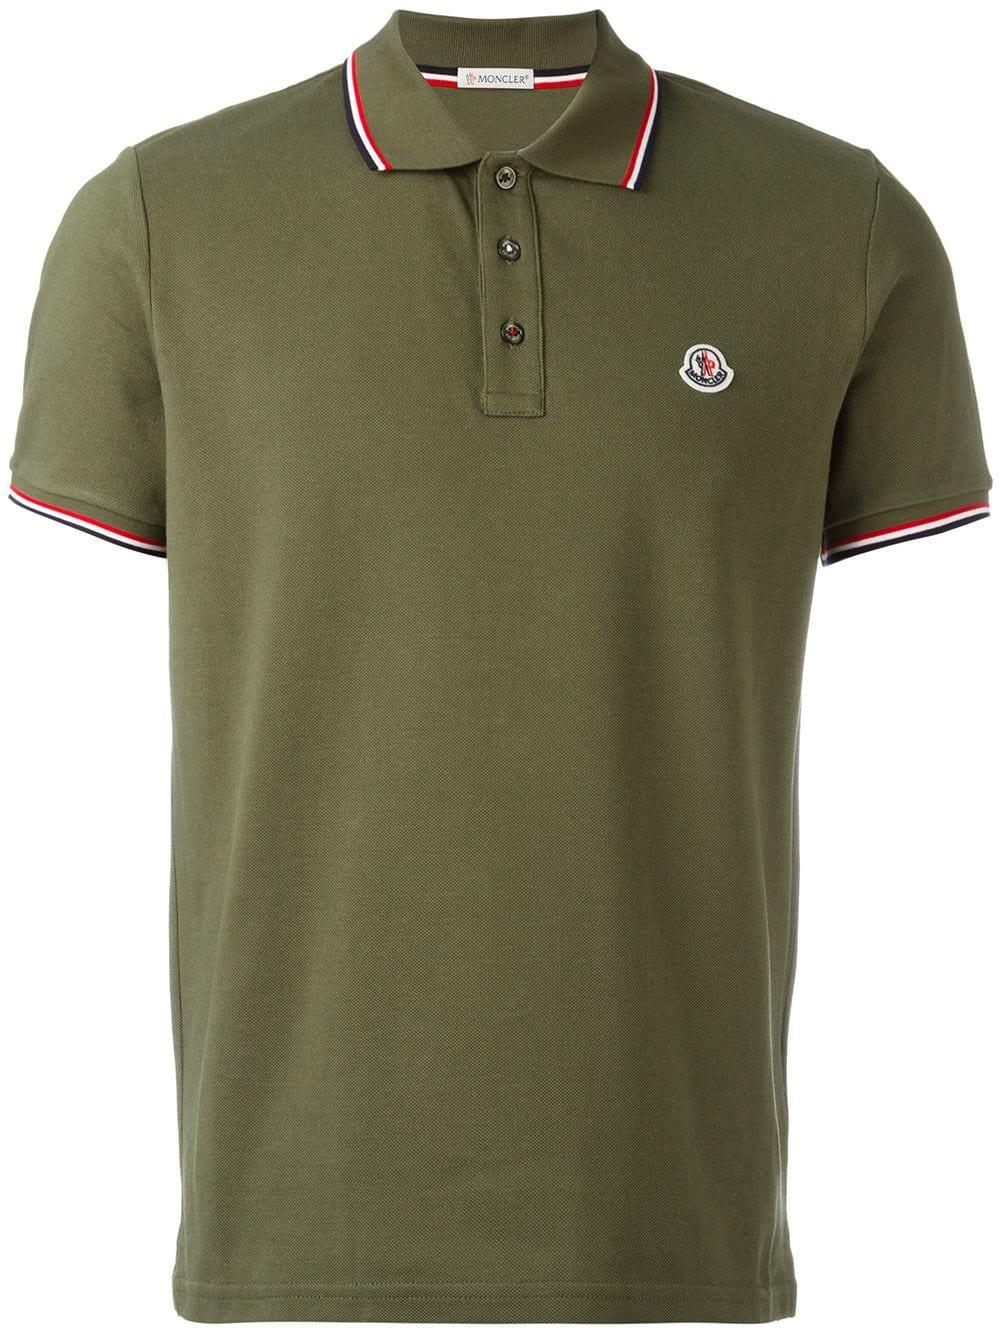 Moncler Striped Trim Polo Shirt in Green for Men - Lyst